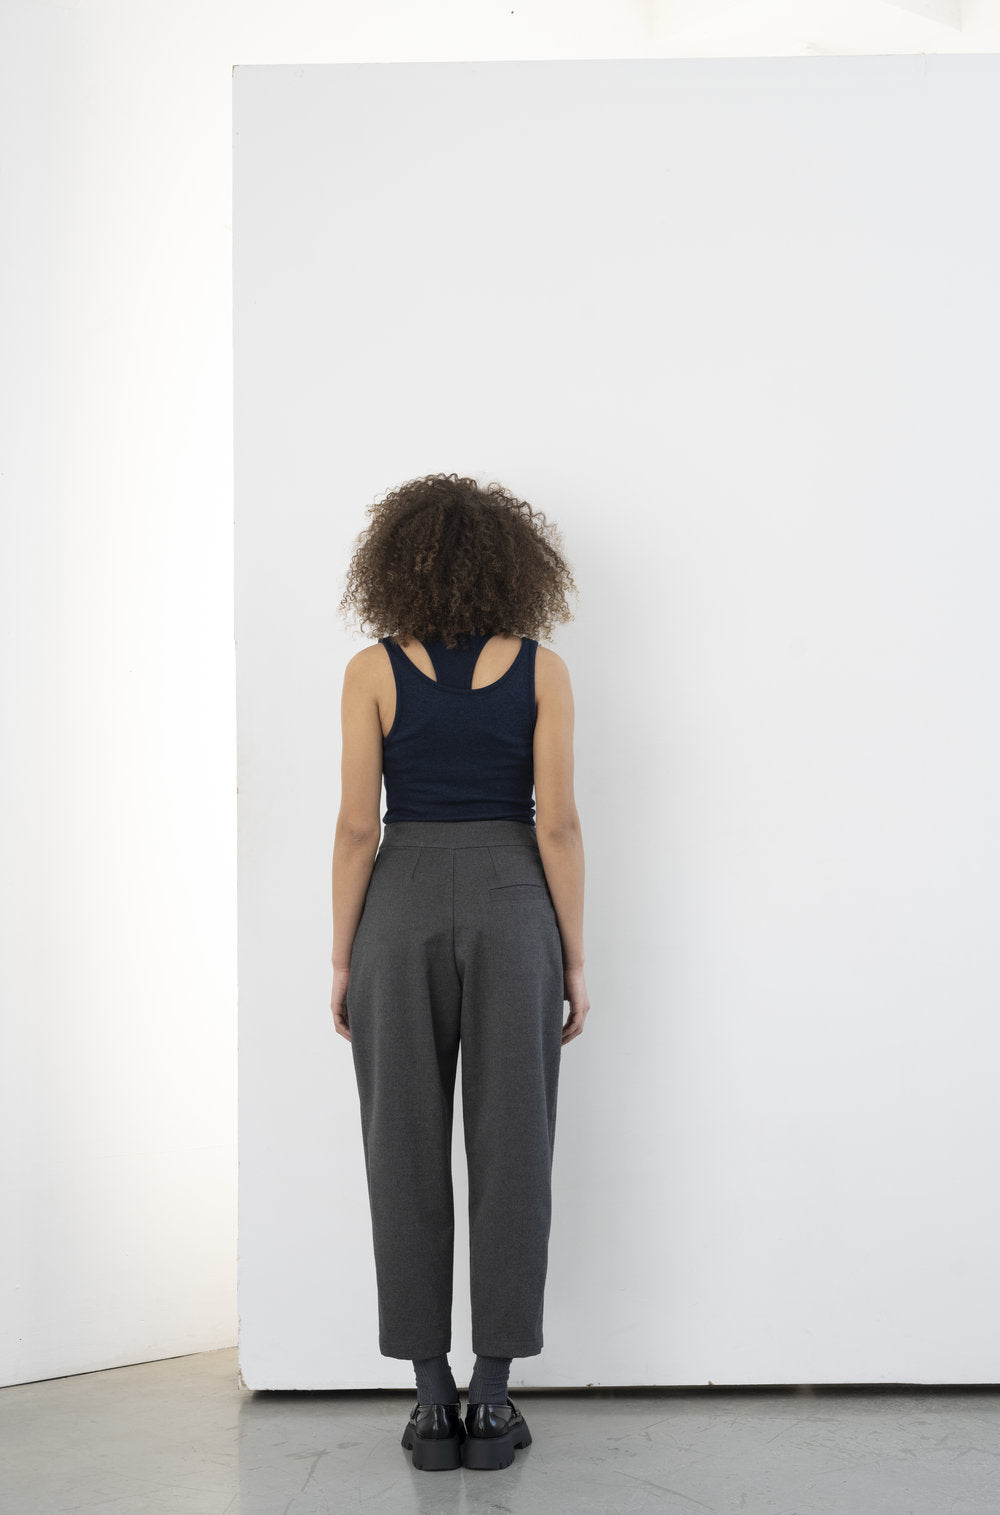 The Olden Pant in charcoal by BODYBAG by Jude is a high-waisted, carrot-style pant with two pleats on each side at the front, an invisible zipper on the side, and one back pocket. lemon cyprus boutique